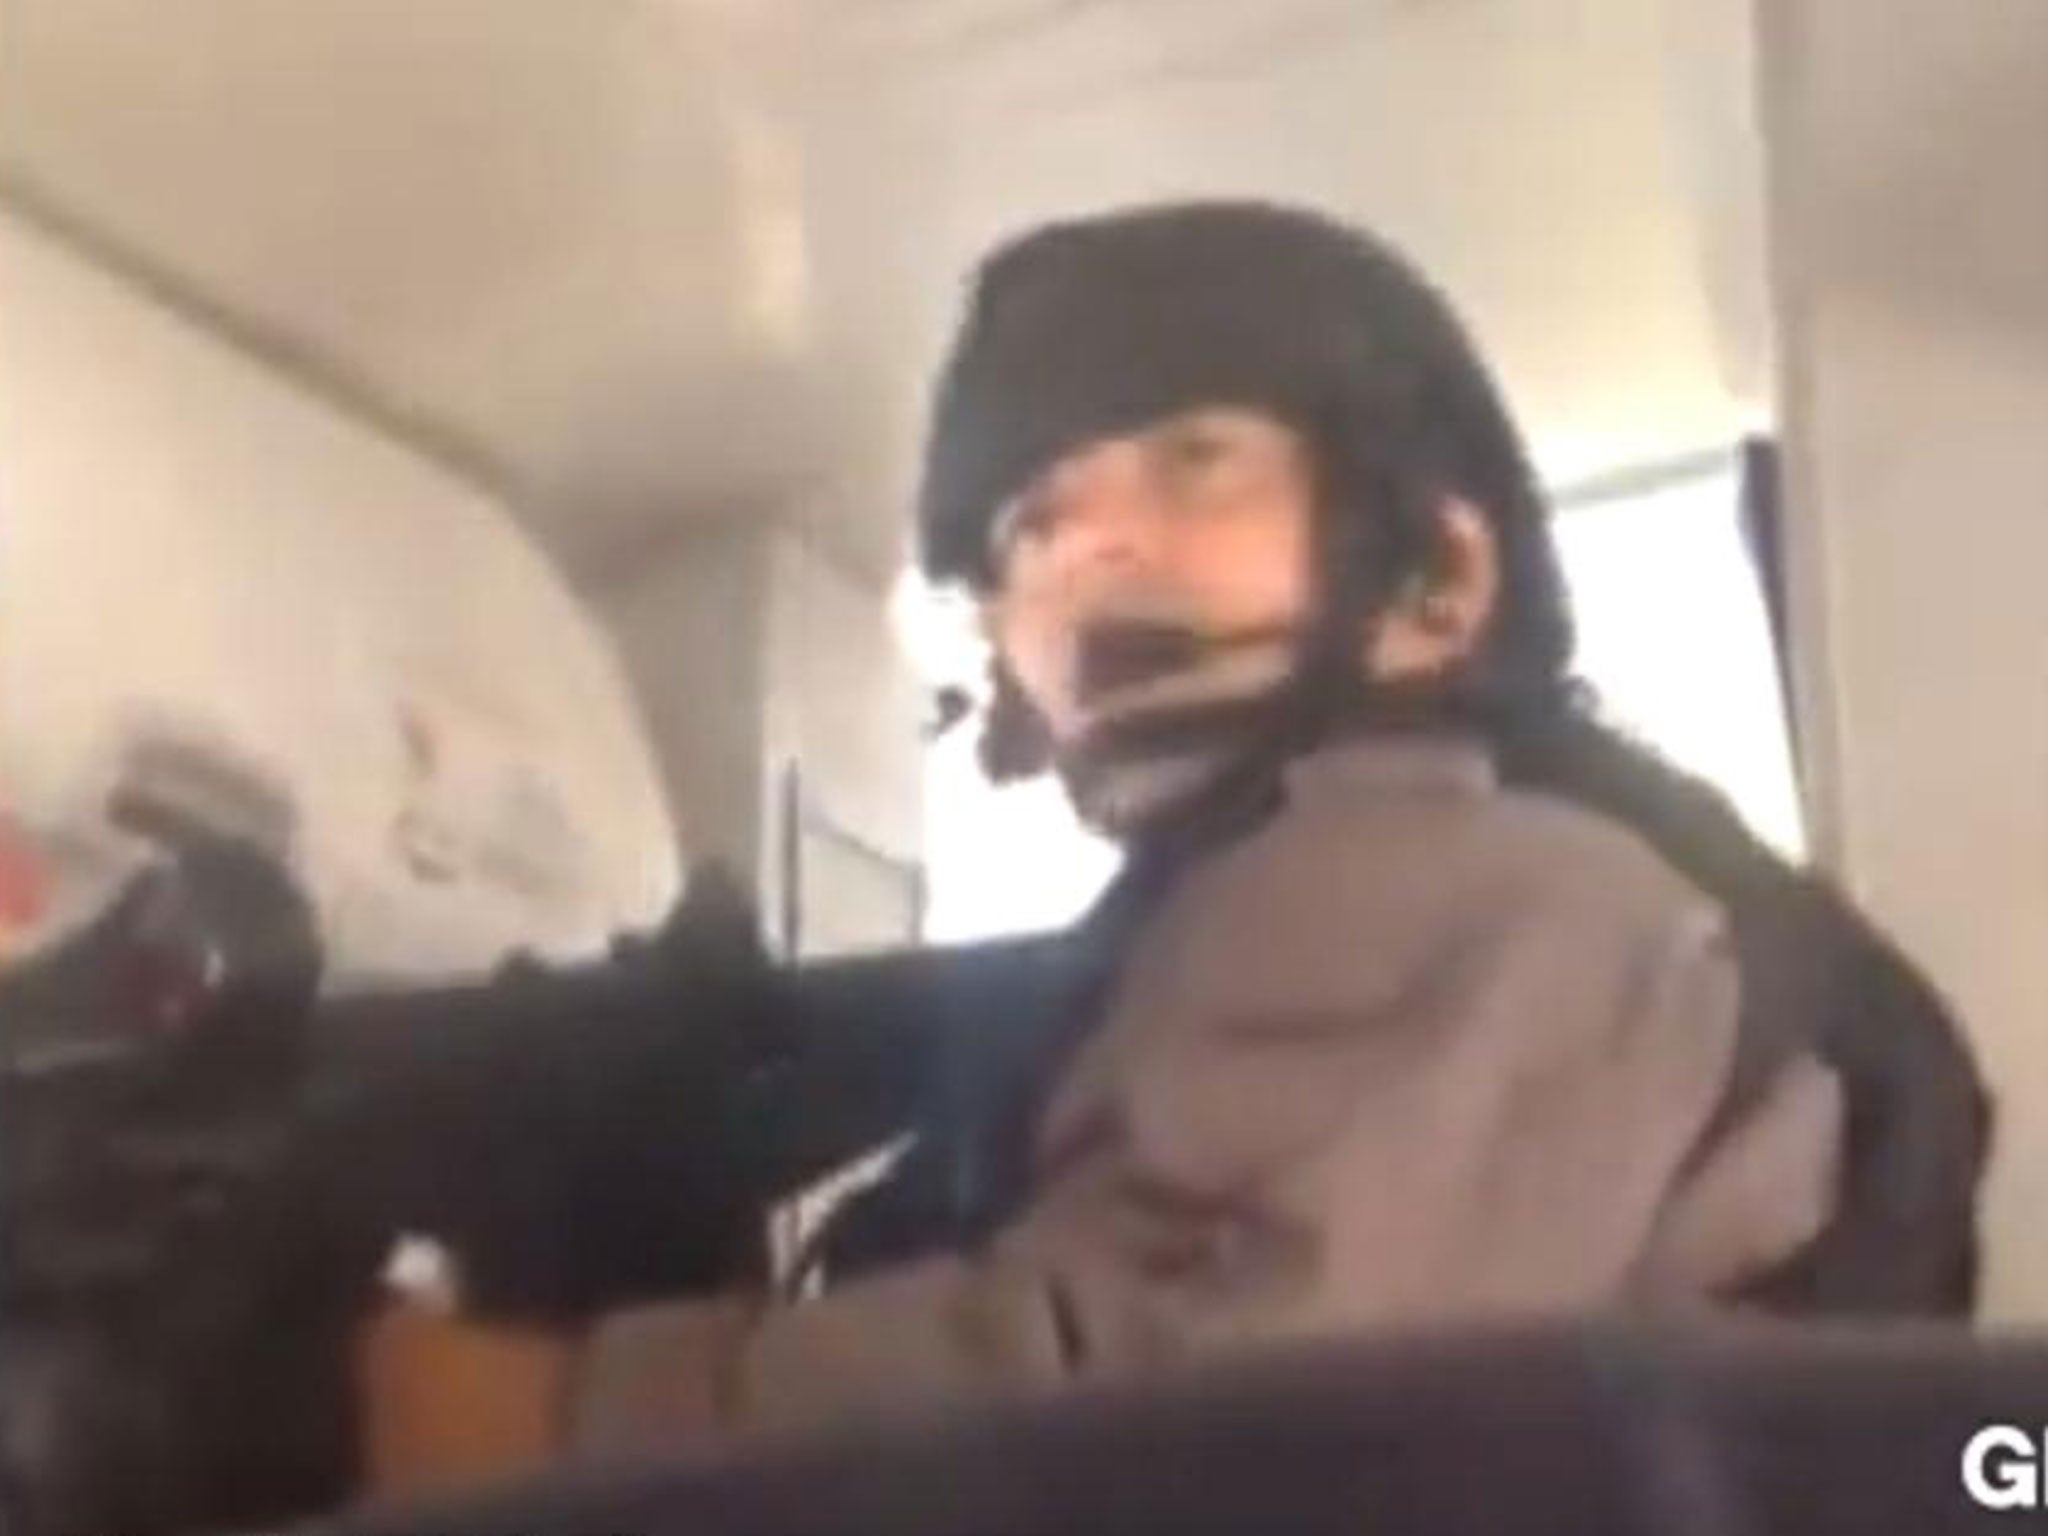 A video shot by a passenger showed armed Canadian law enforcement officers shouting "heads down, hands up" as they stormed aboard the aircraft in helmets and tactical gear